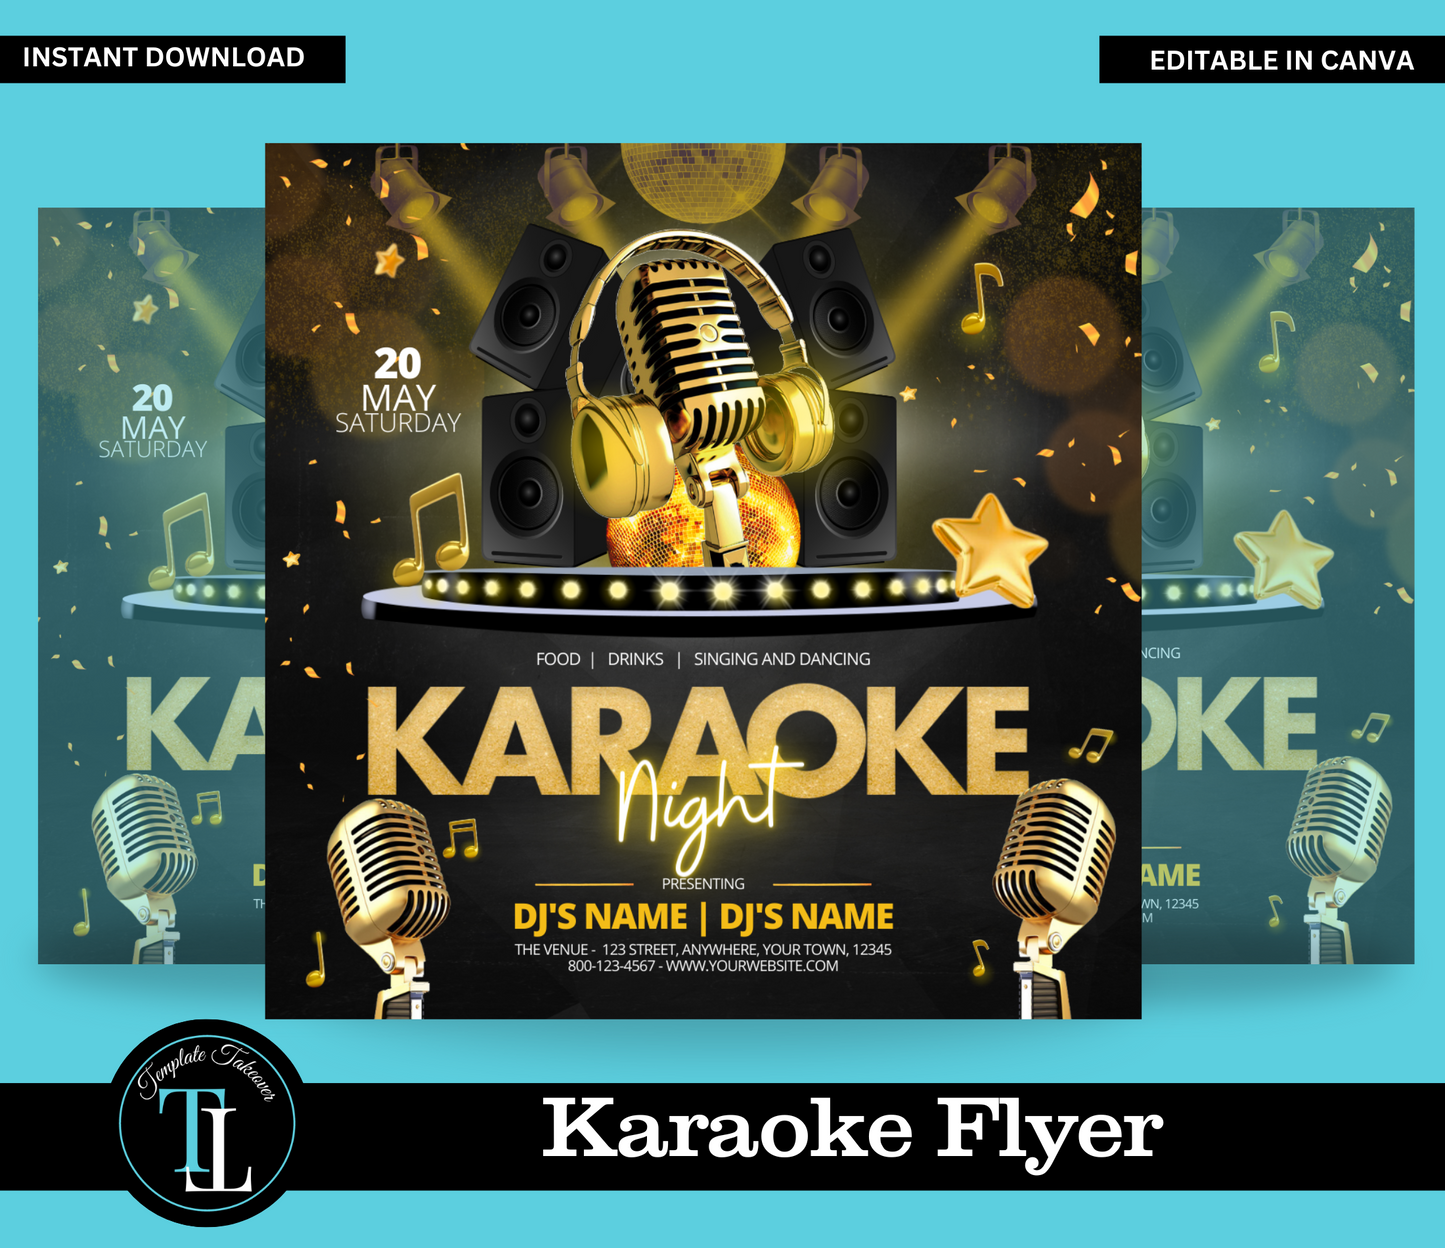 Editable Karaoke Flyer | Editable, Shareable, Printable Invite, Let's Party, Any Age, Editable Template, Instant Download